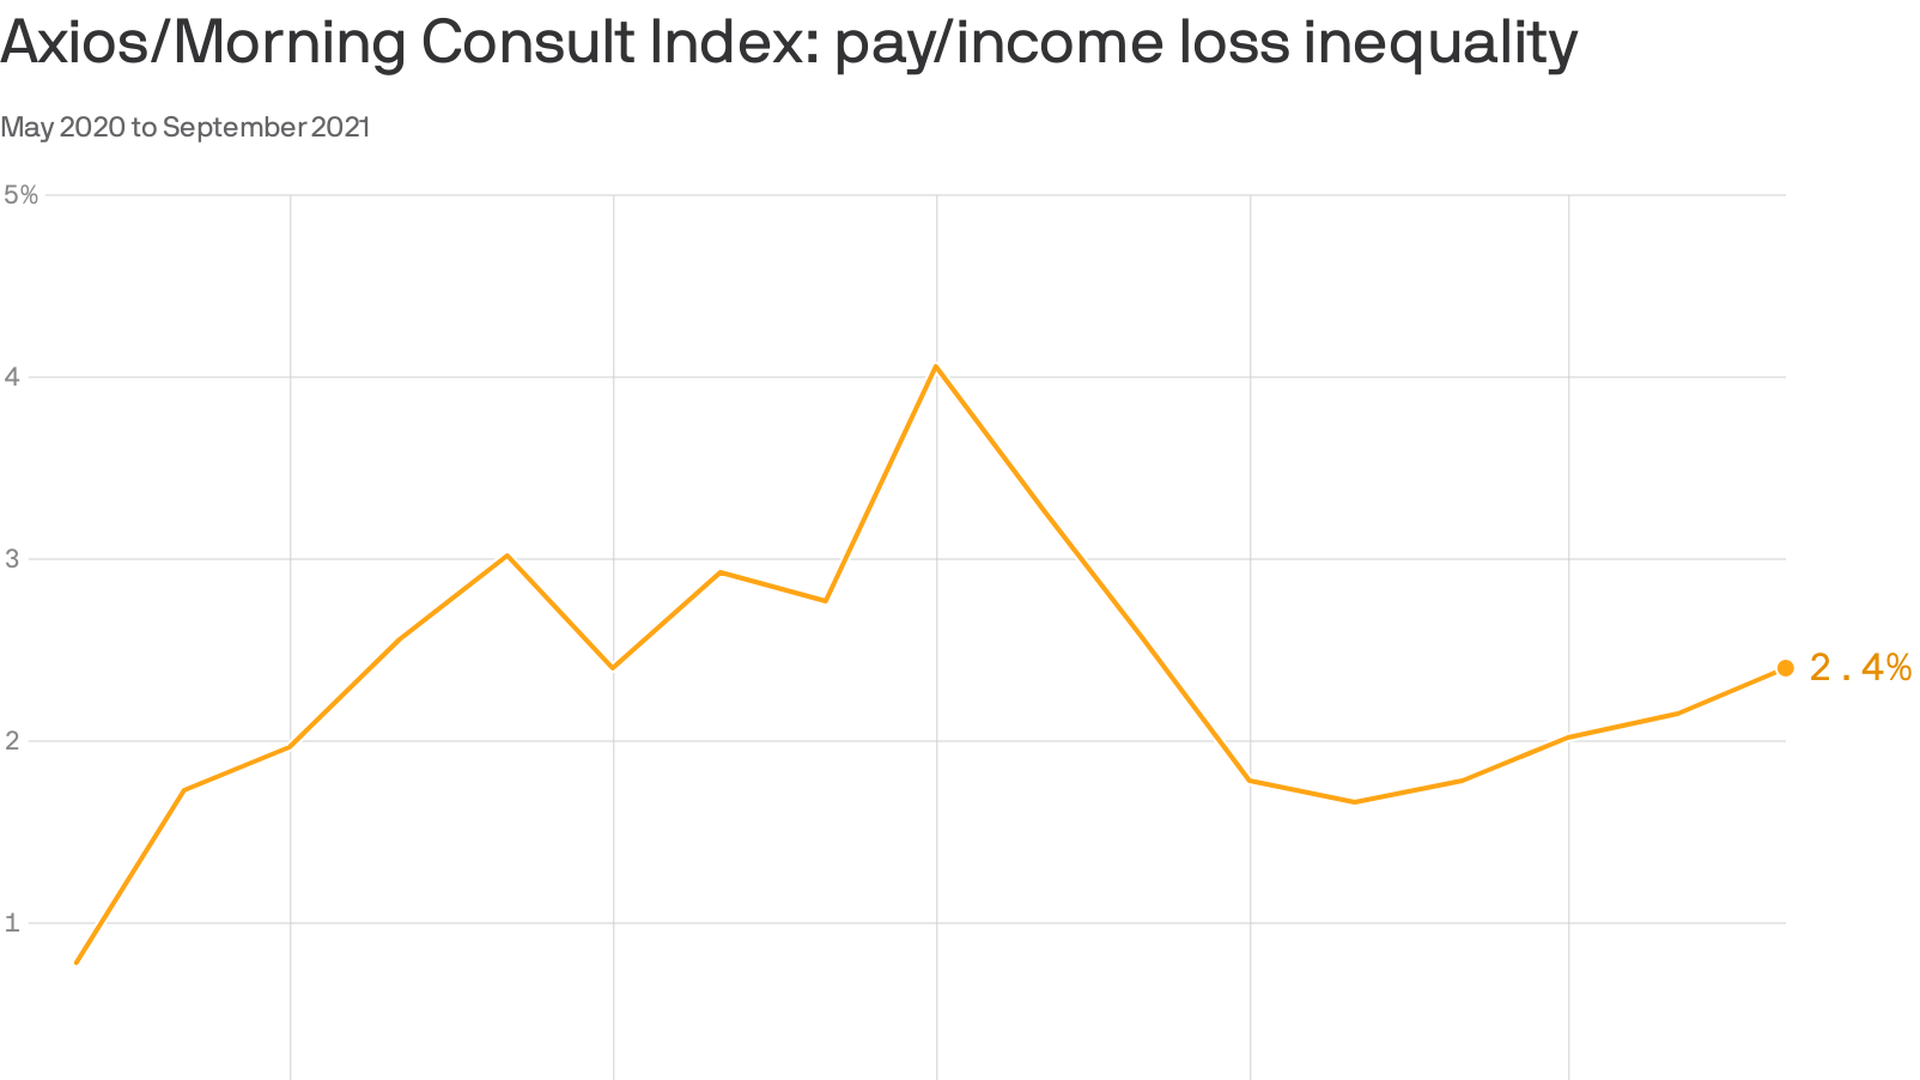 A chart showing pay/income loss inequality